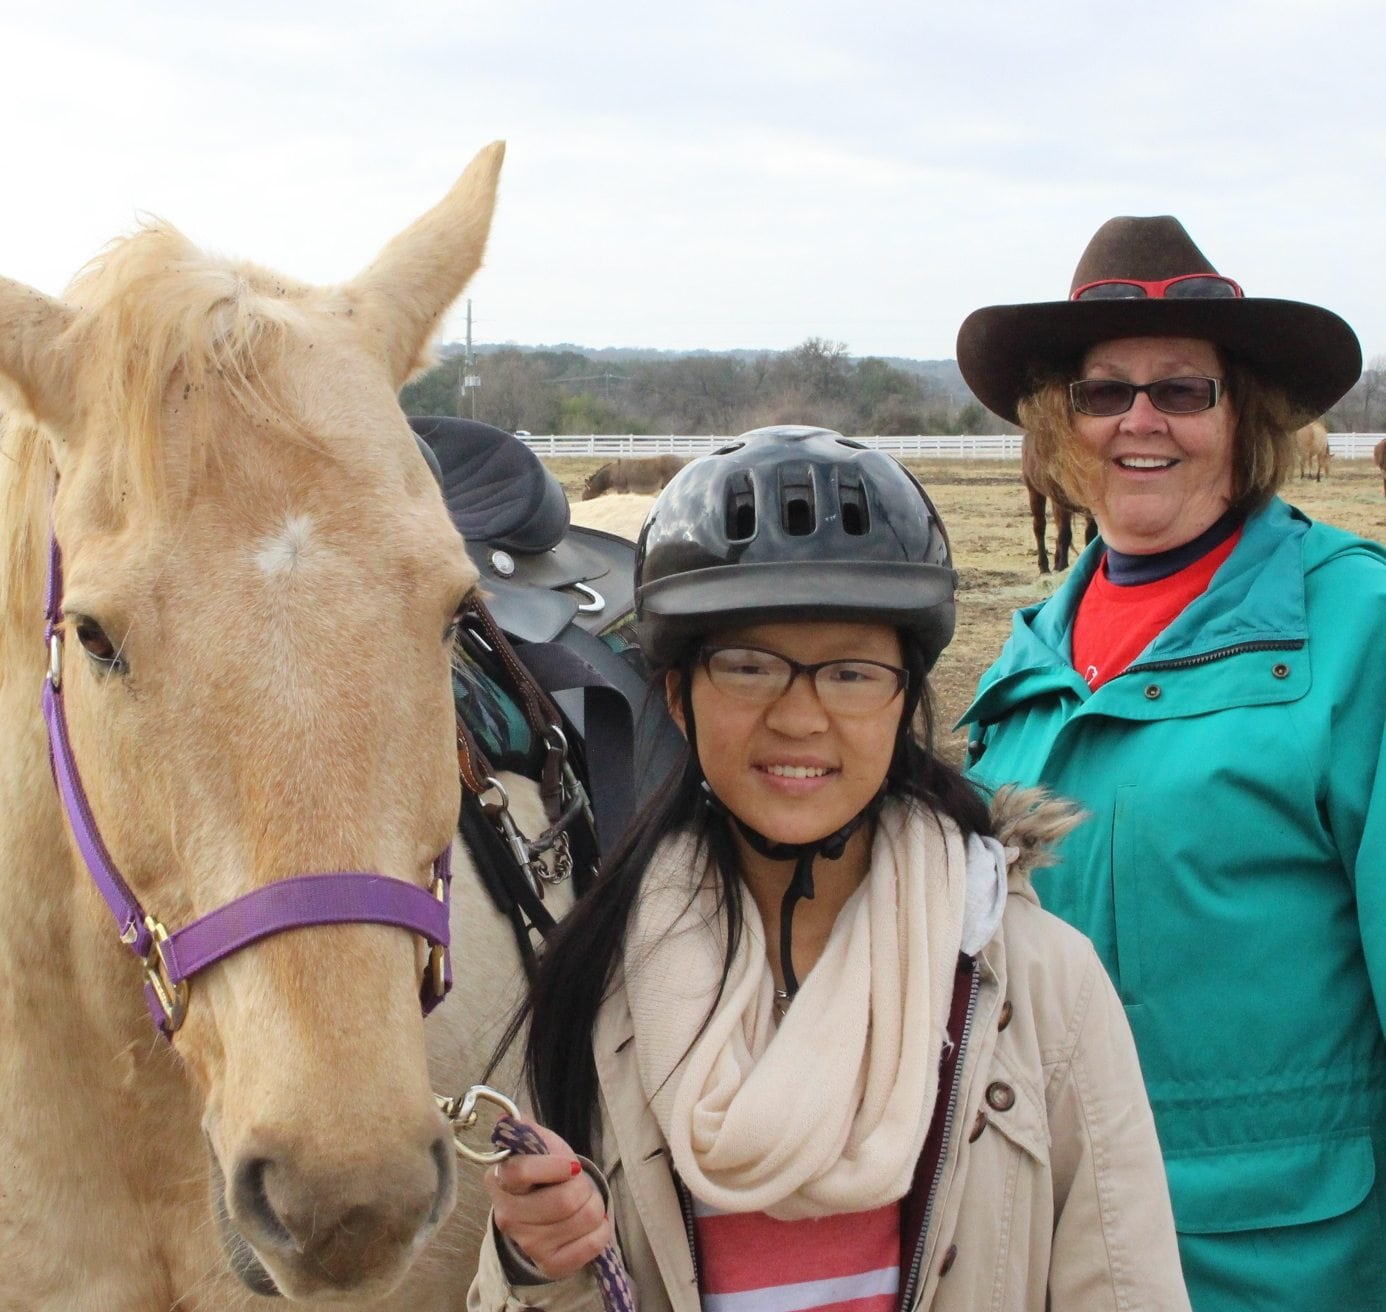 A young woman holding on to a horse's bridle while standing next to her volunteer riding instructor.